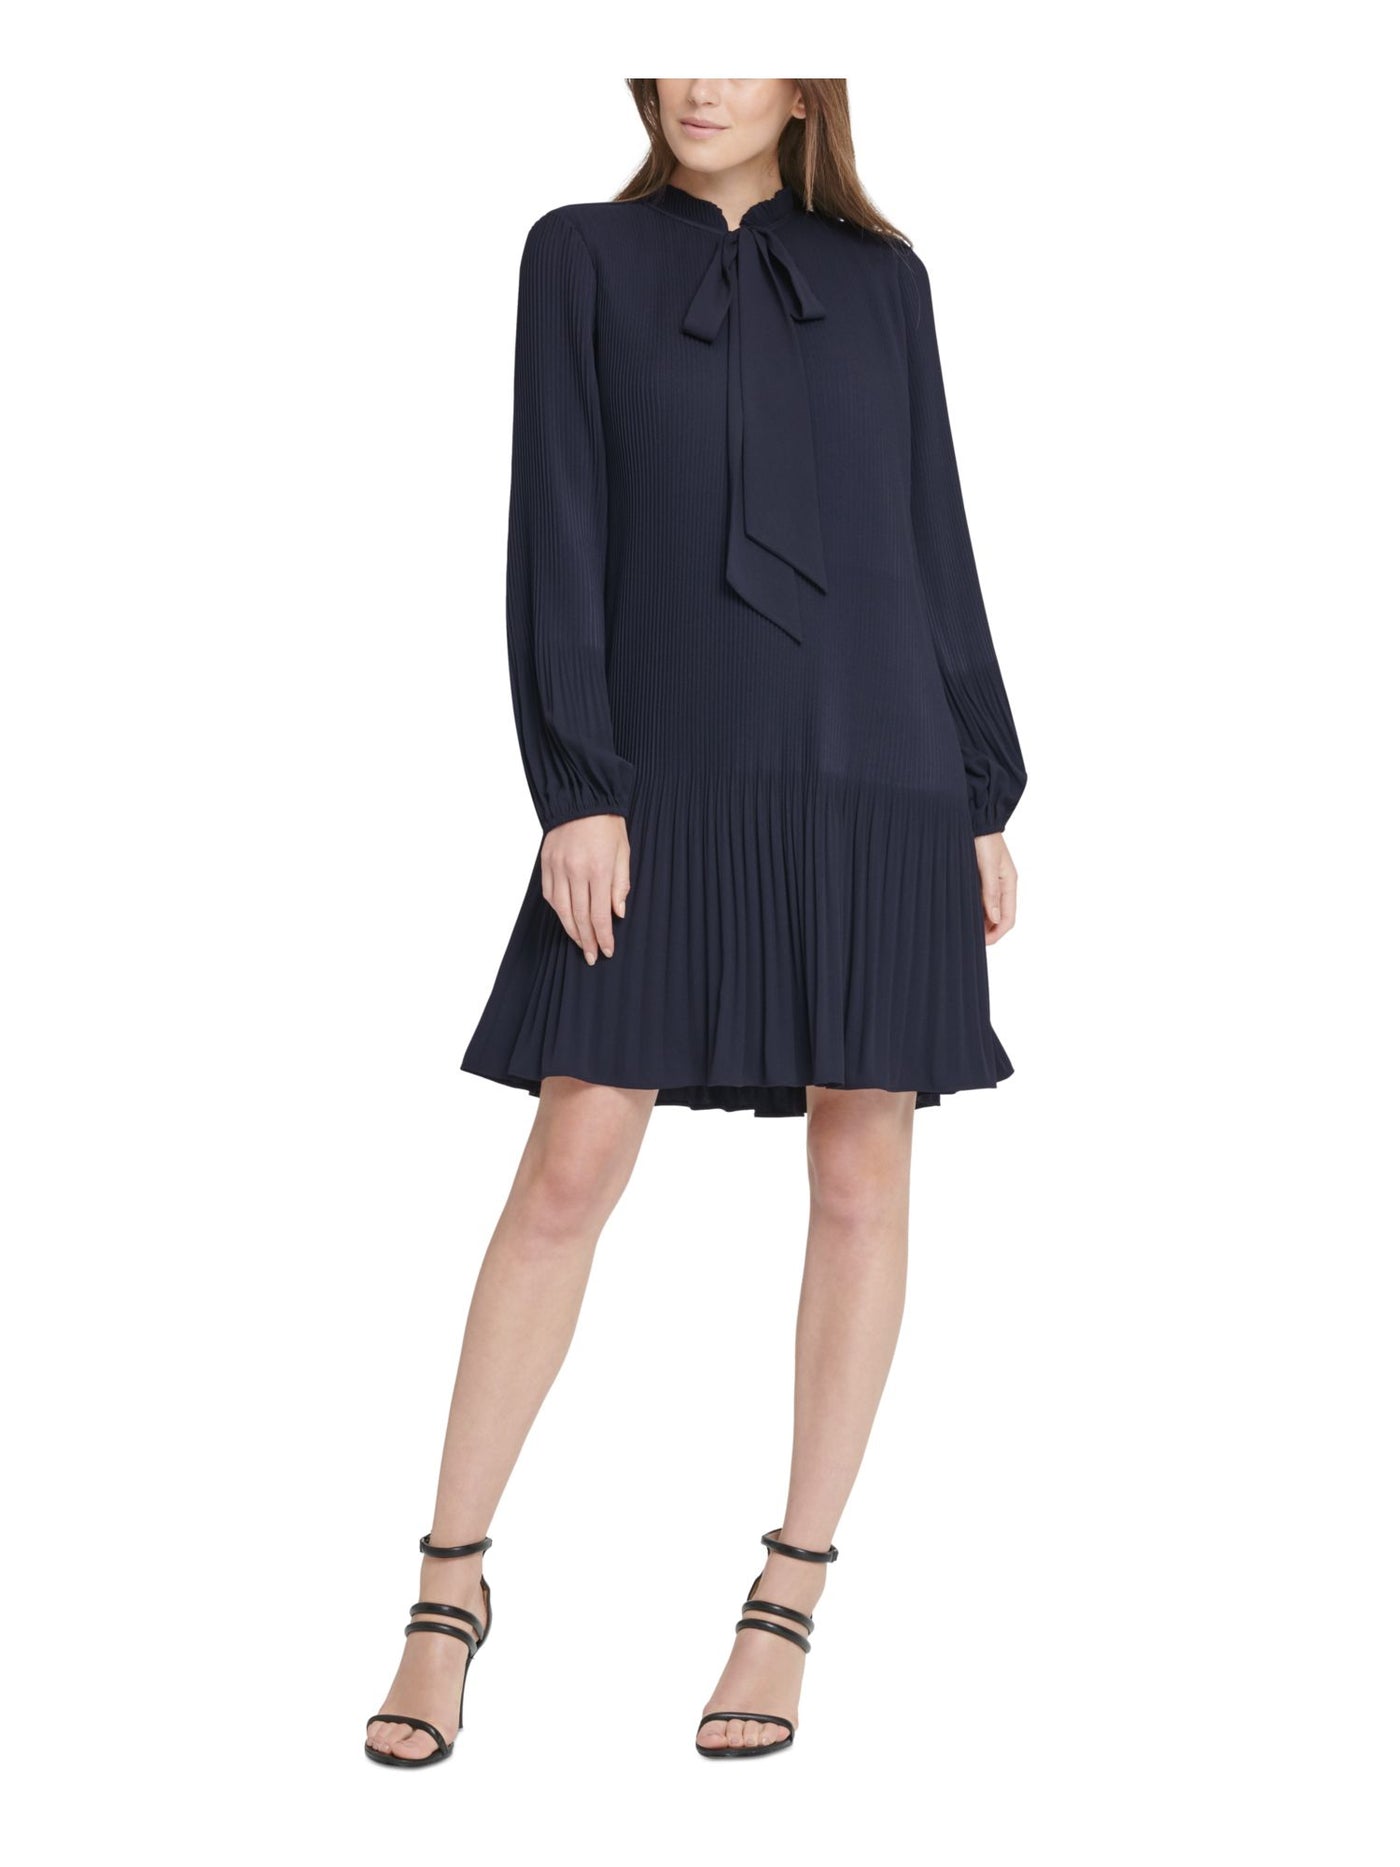 DKNY Womens Navy Tie Pleated Pullover Lined Long Sleeve Split Above The Knee Wear To Work Shift Dress Petites 8P